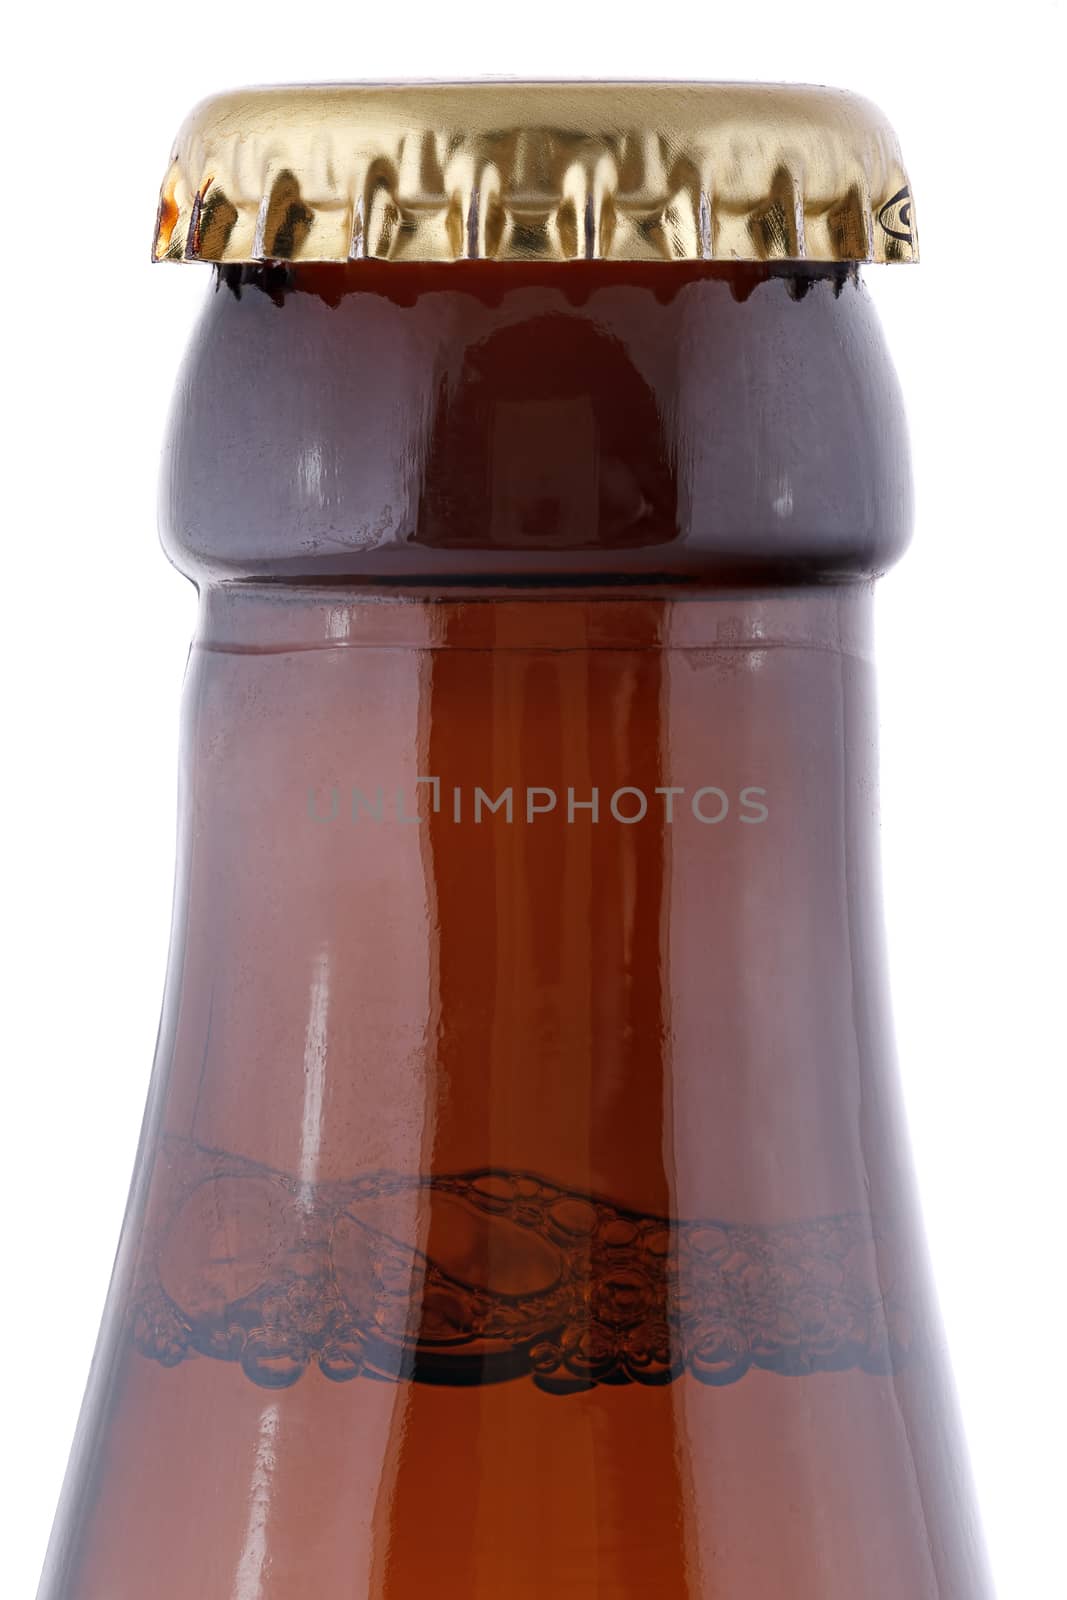 Closed, brown beer bottle on a white background.